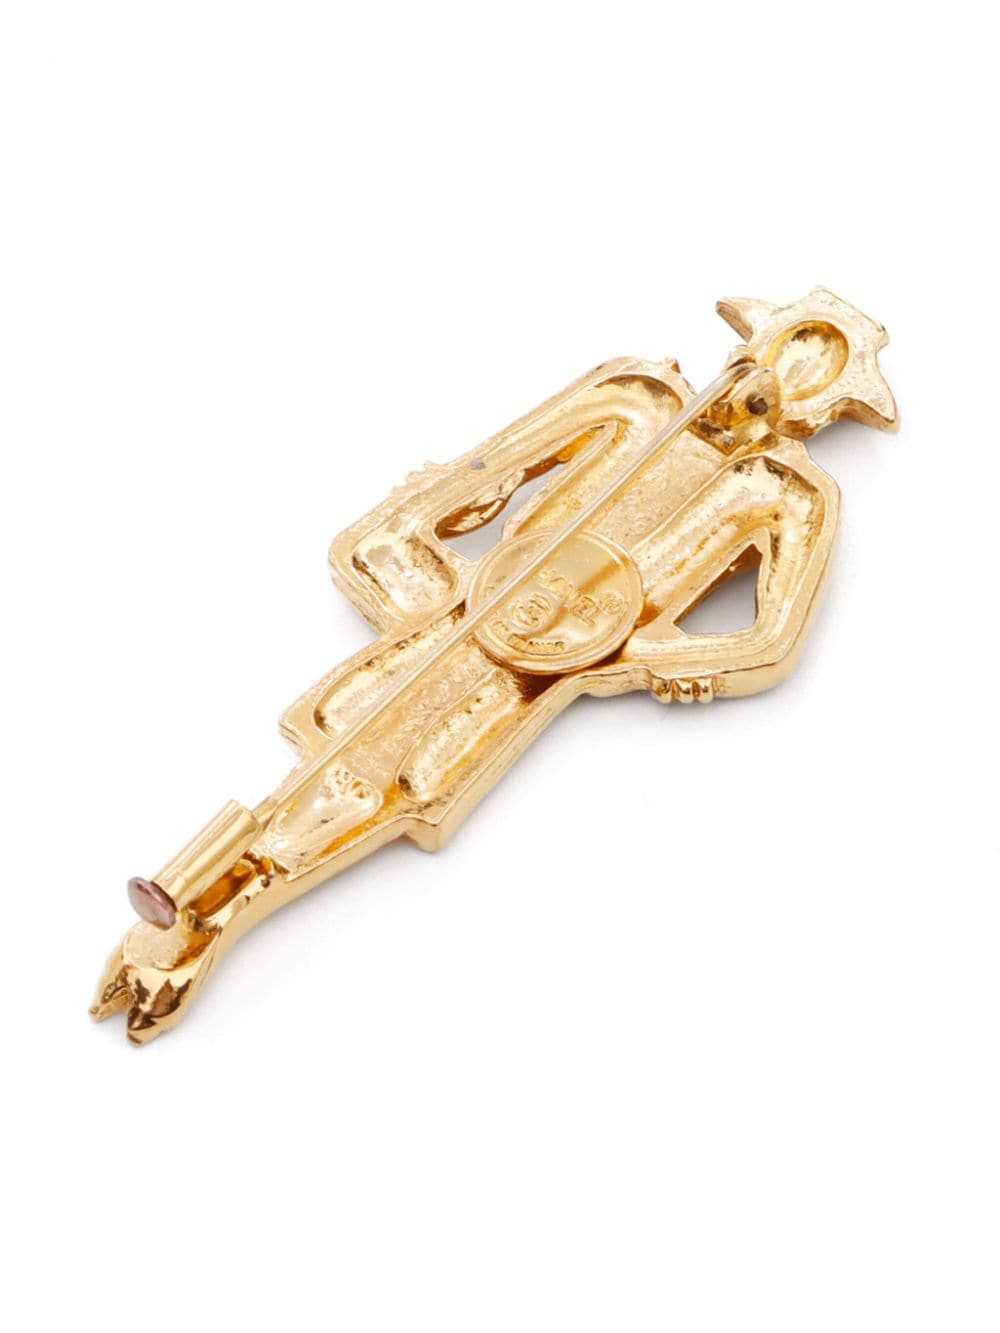 CHANEL Pre-Owned 1981-1985 Mademoiselle brooch - … - image 4